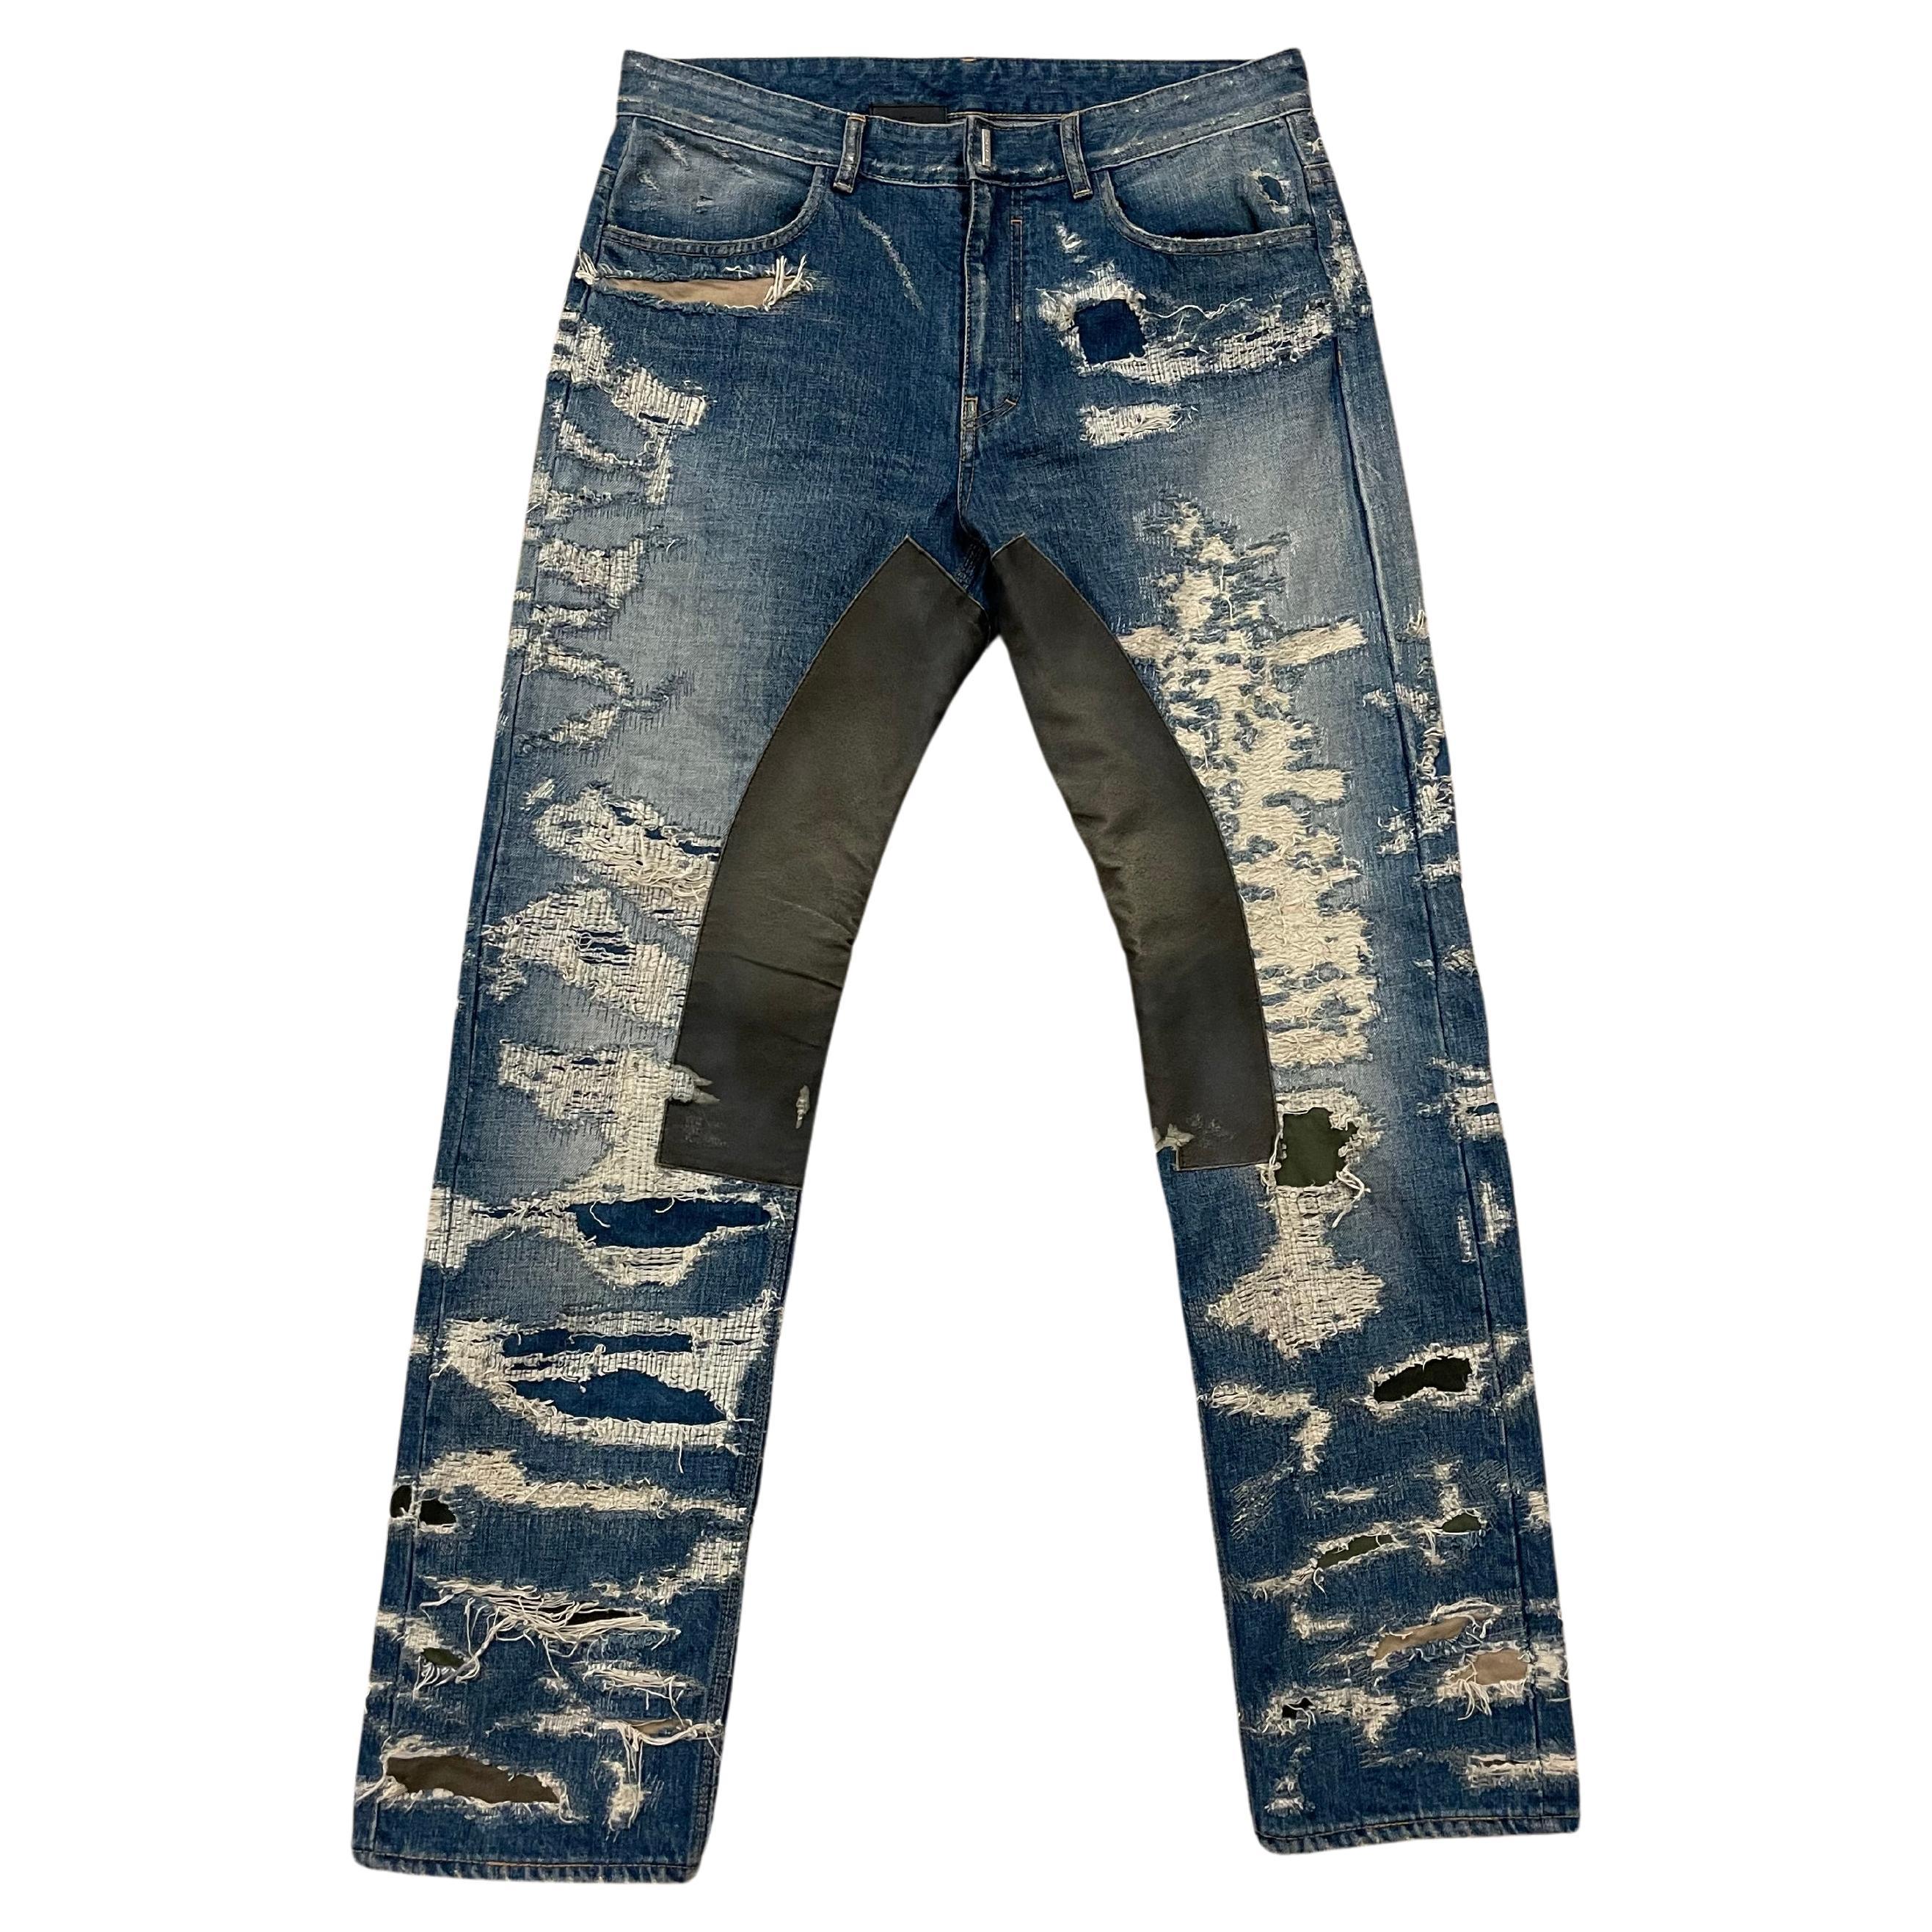 Givenchy Matthew Williams Jeans In Destroyed Denim Moleskin size 34 For Sale